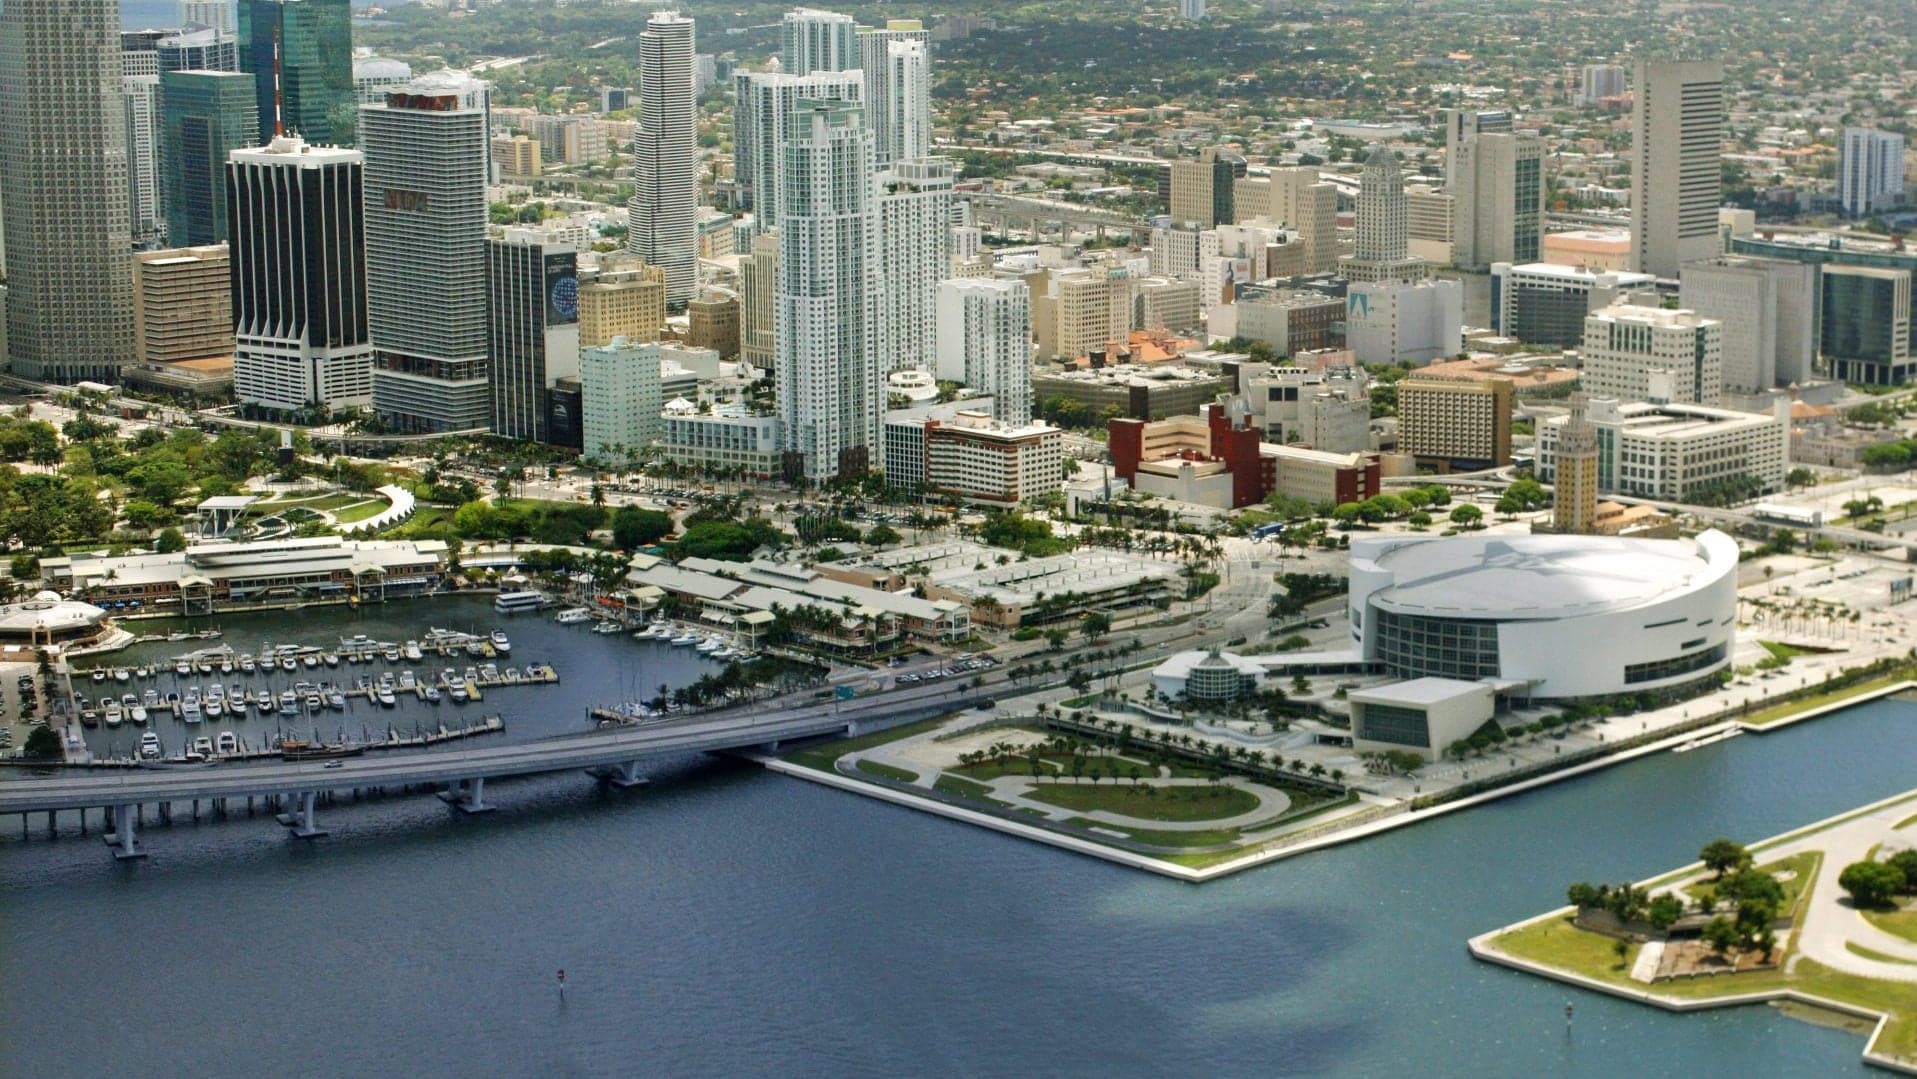 The Proposed Miami Grand Prix Route From Bird’s Eye View